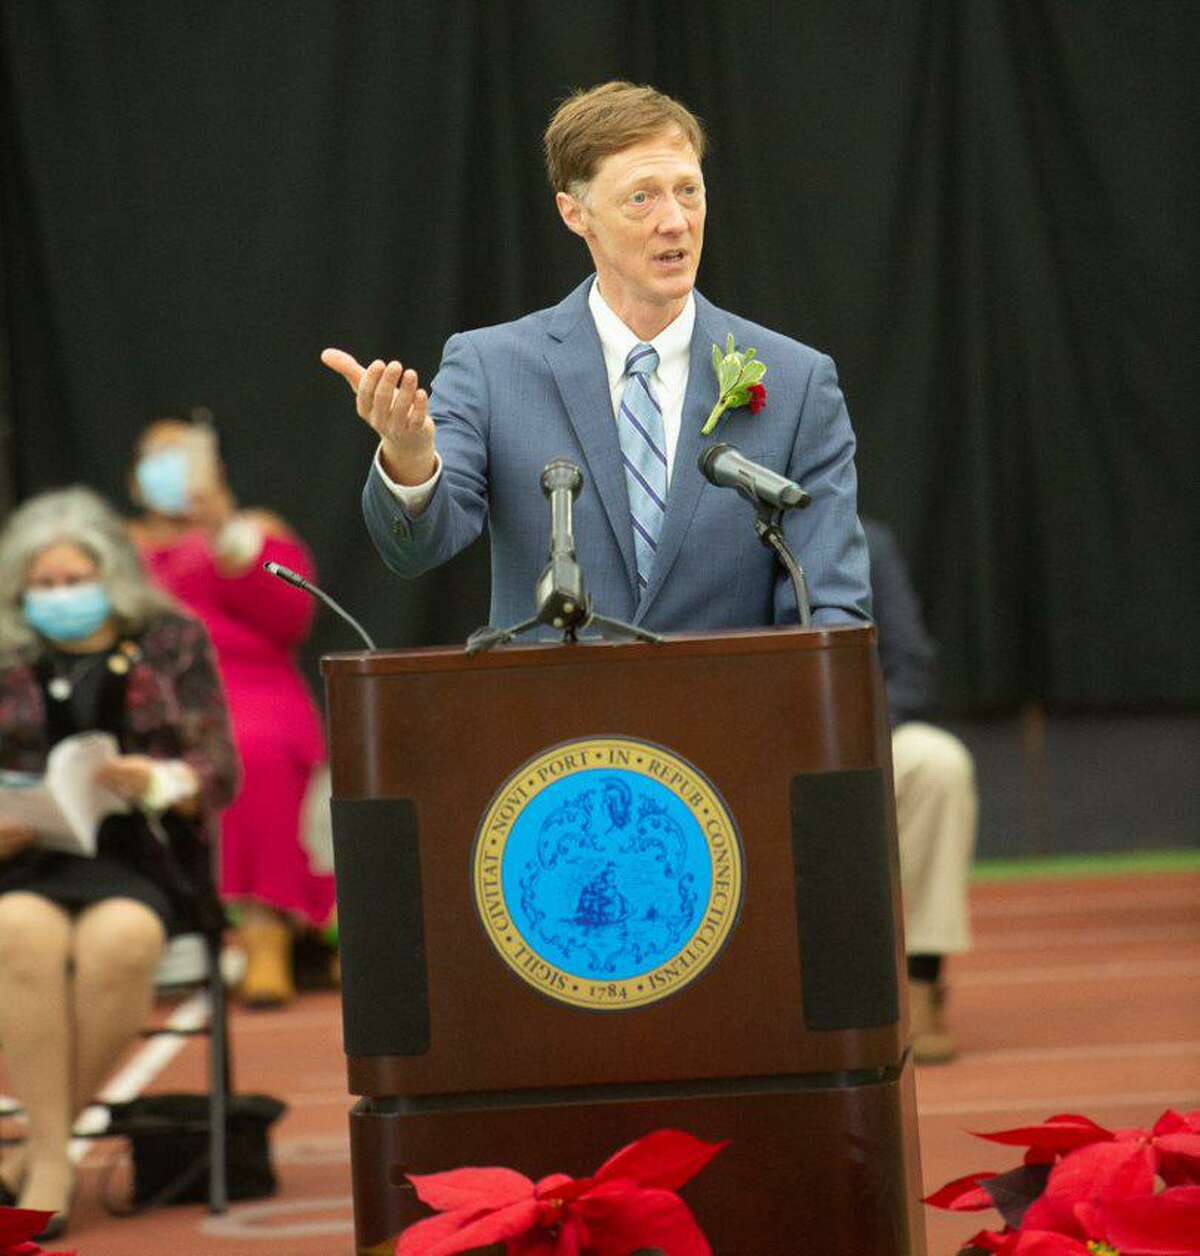 Mayor Justin Elicker speaks at an inauguration ceremony on Saturday, January 1, 2022 at Hillhouse High School.